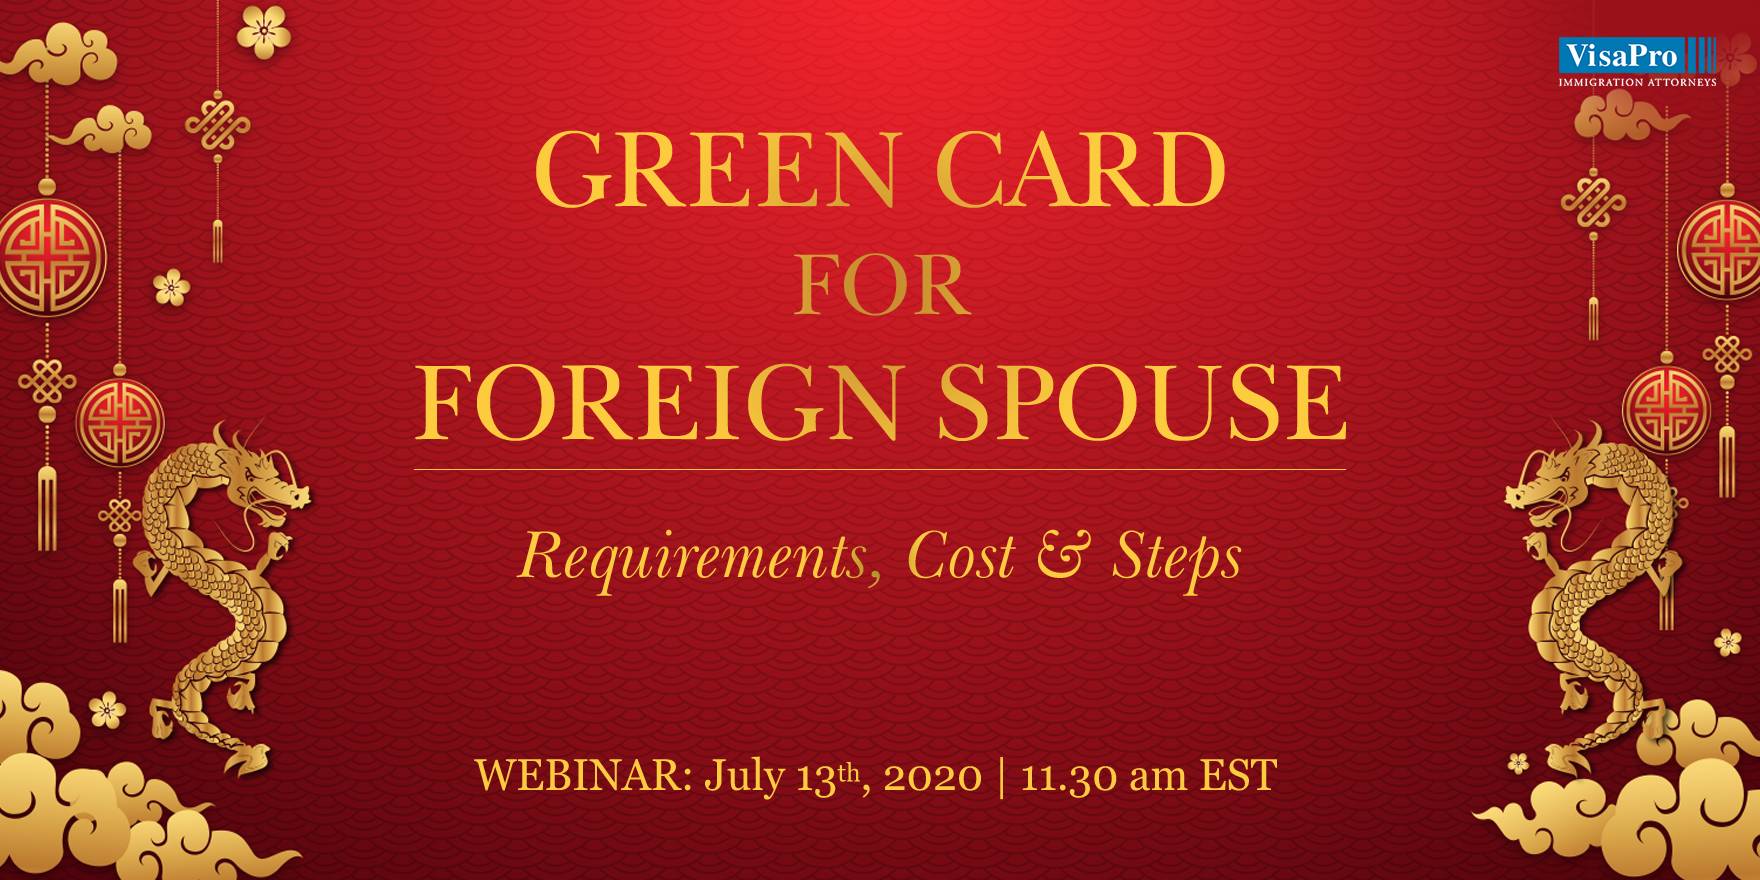 GREEN CARD For FOREIGN SPOUSE: Requirements, Cost & Steps, Beijing, China